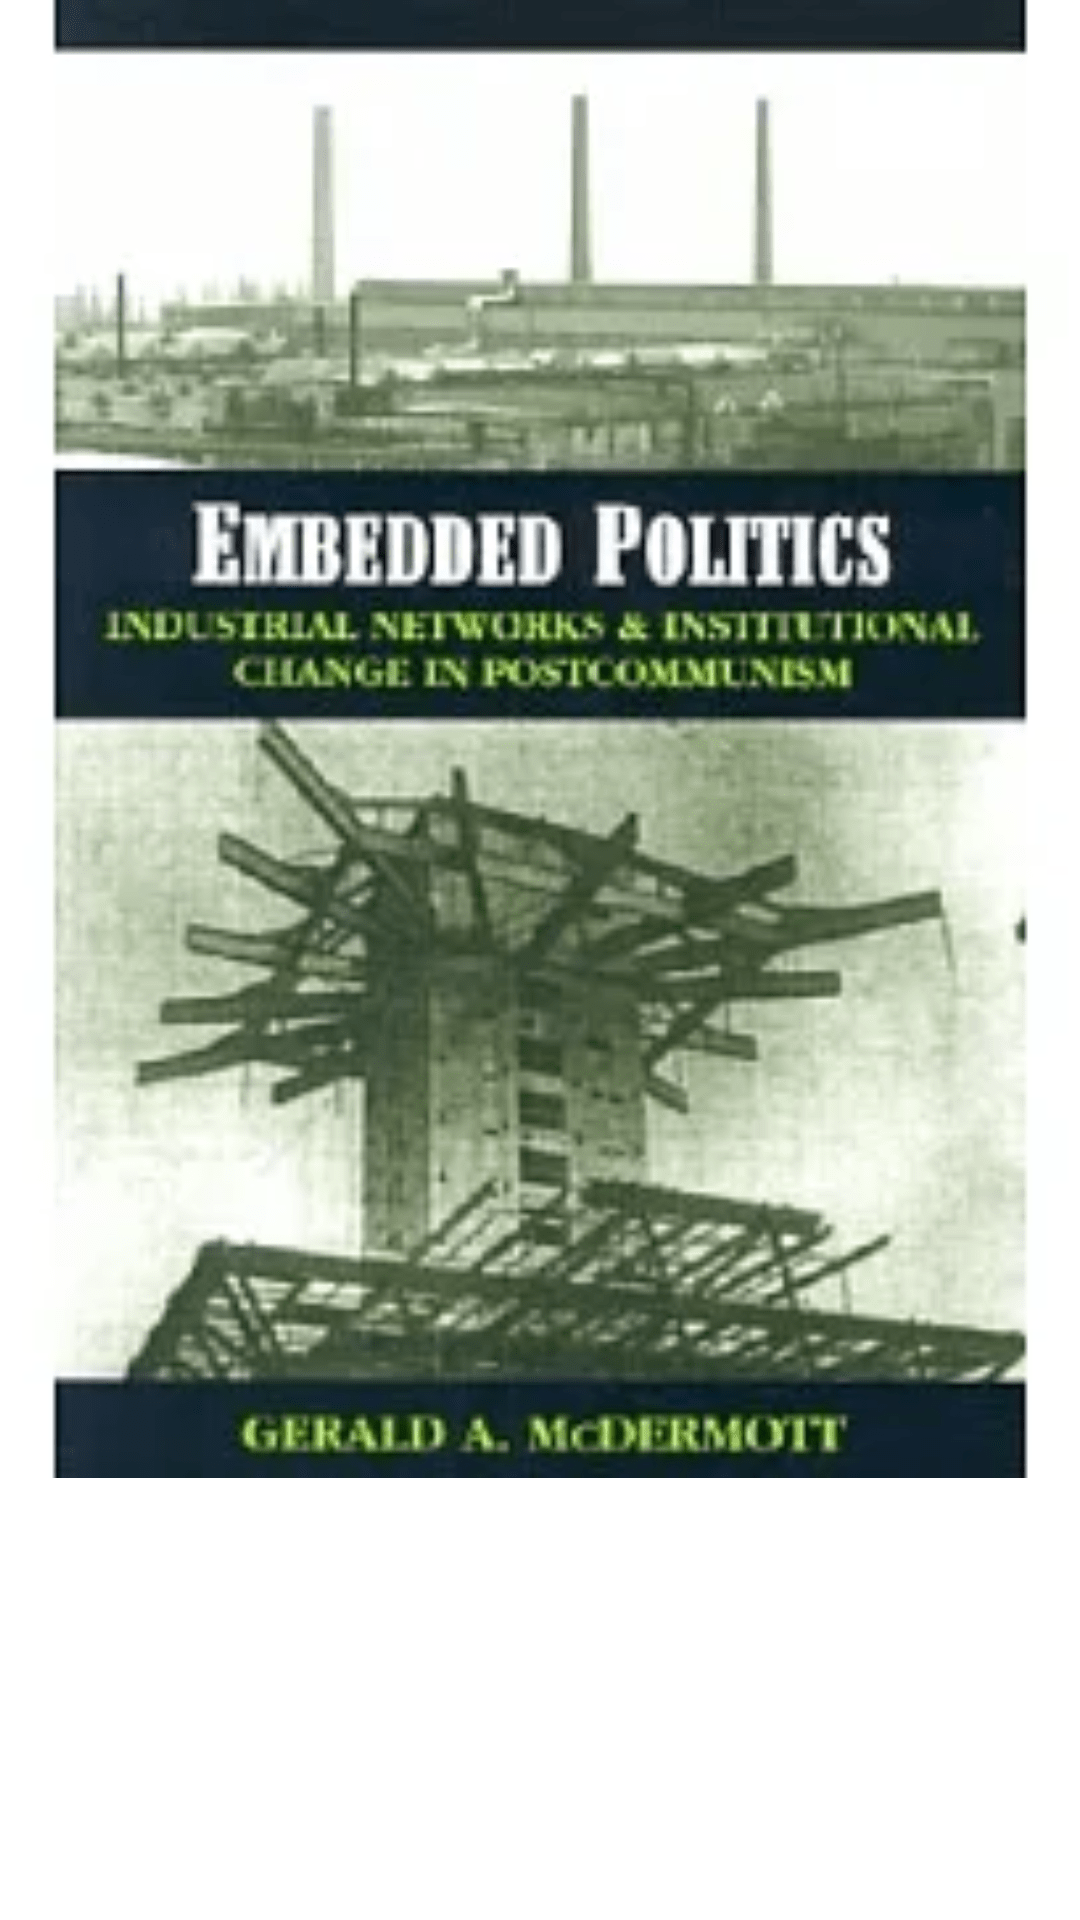 Embedded Politics: Industrial Networks and Institutional Change in Postcommunism